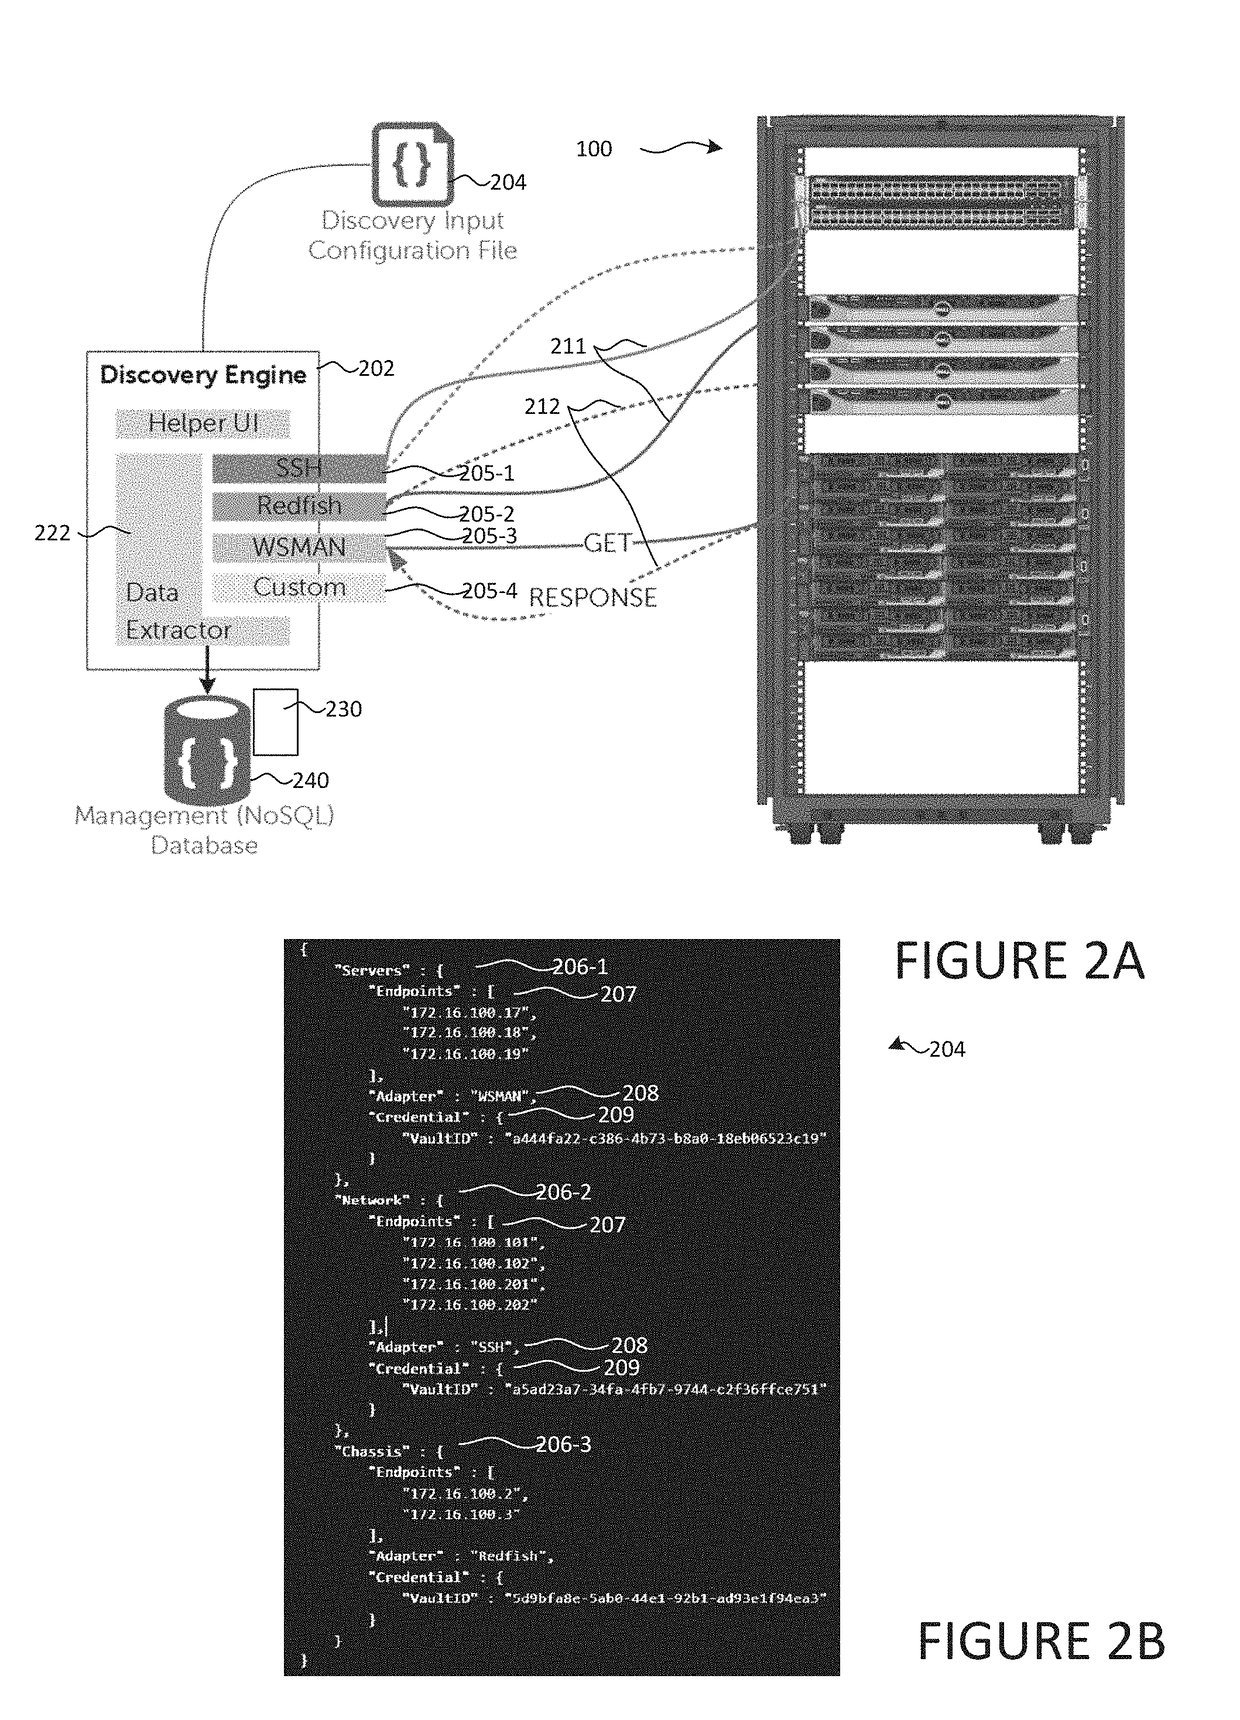 Storage isolation domains for converged infrastructure information handling systems